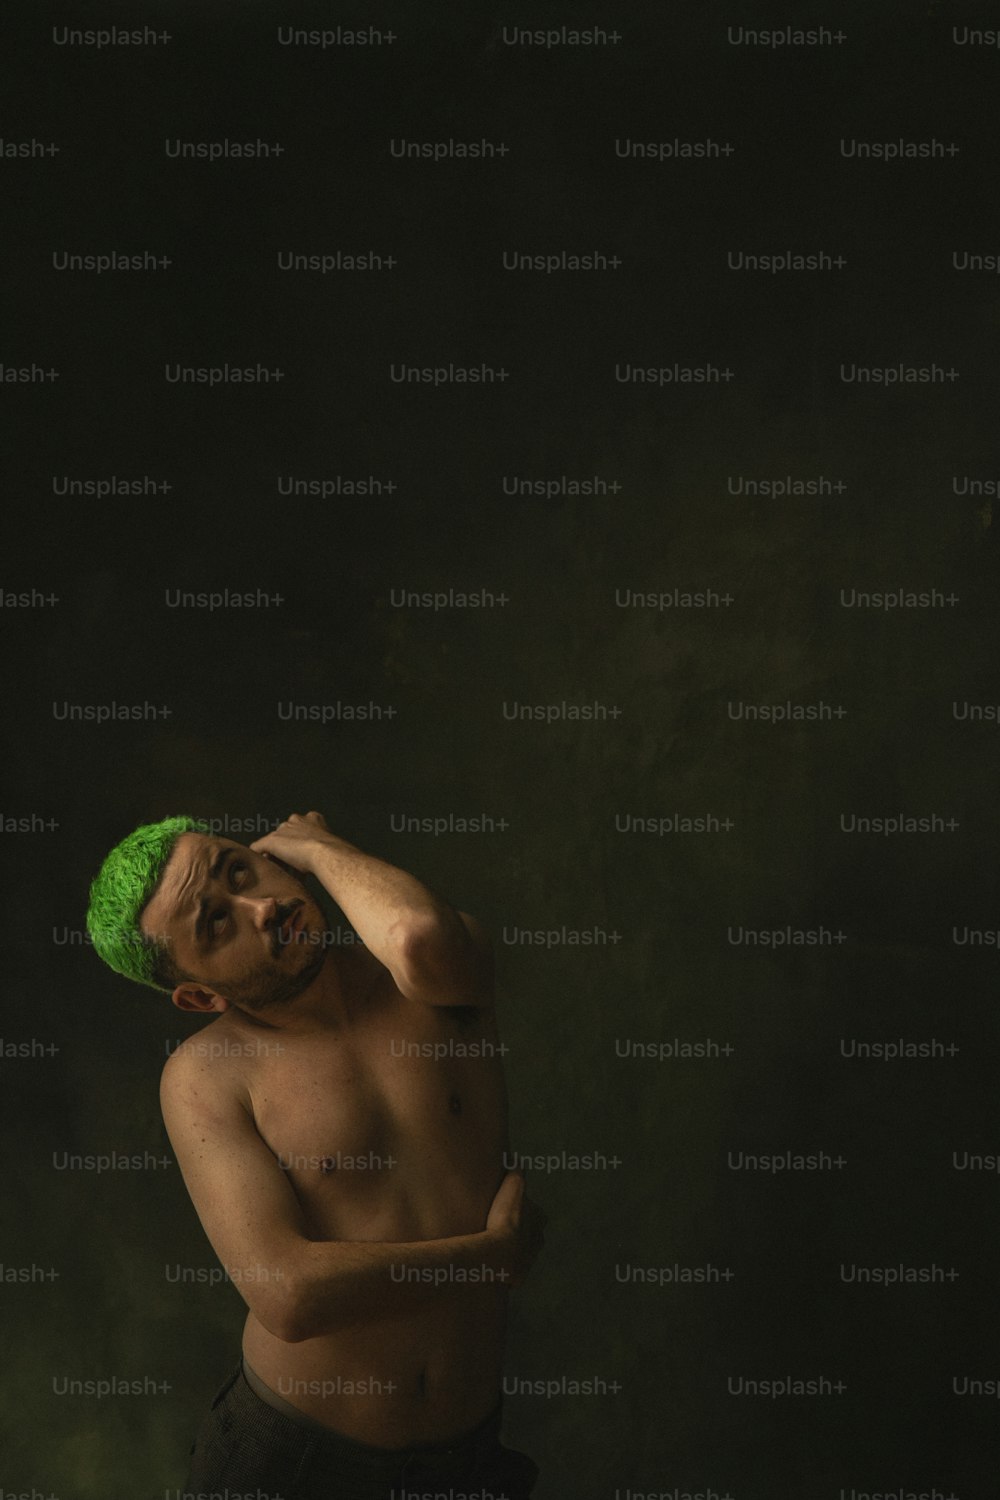 a man with a green hat and no shirt